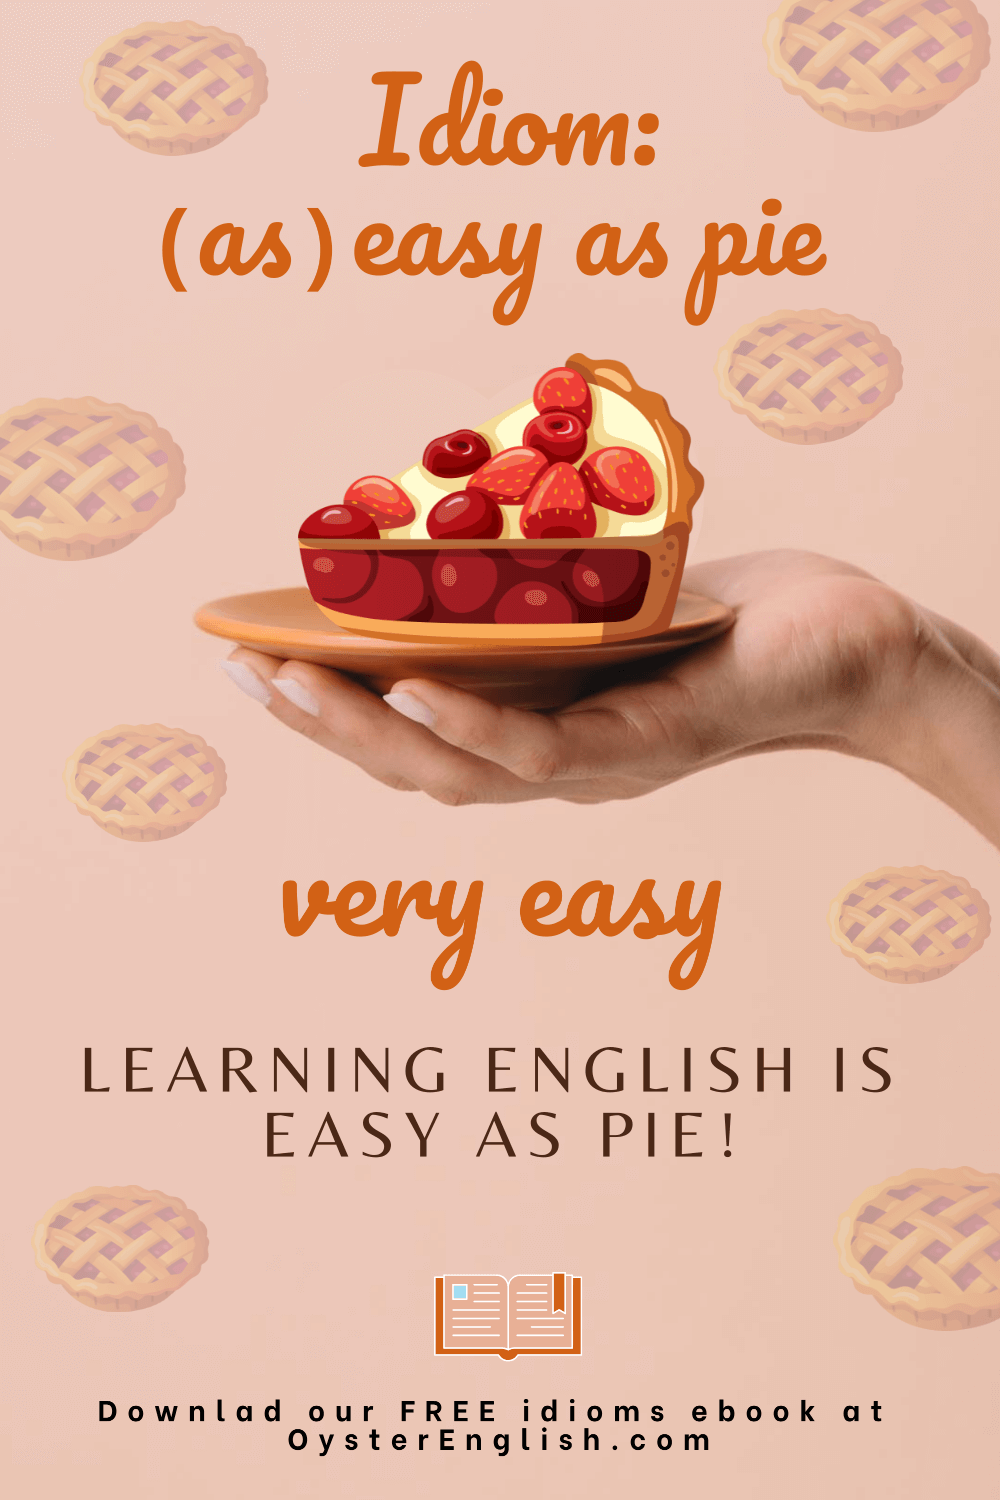 Picture of a hand holding a plate with a piece of strawberry and cherry pie to depict the idiom "easy as pie," which means very easy. Caption: Learning English is easy as pie!